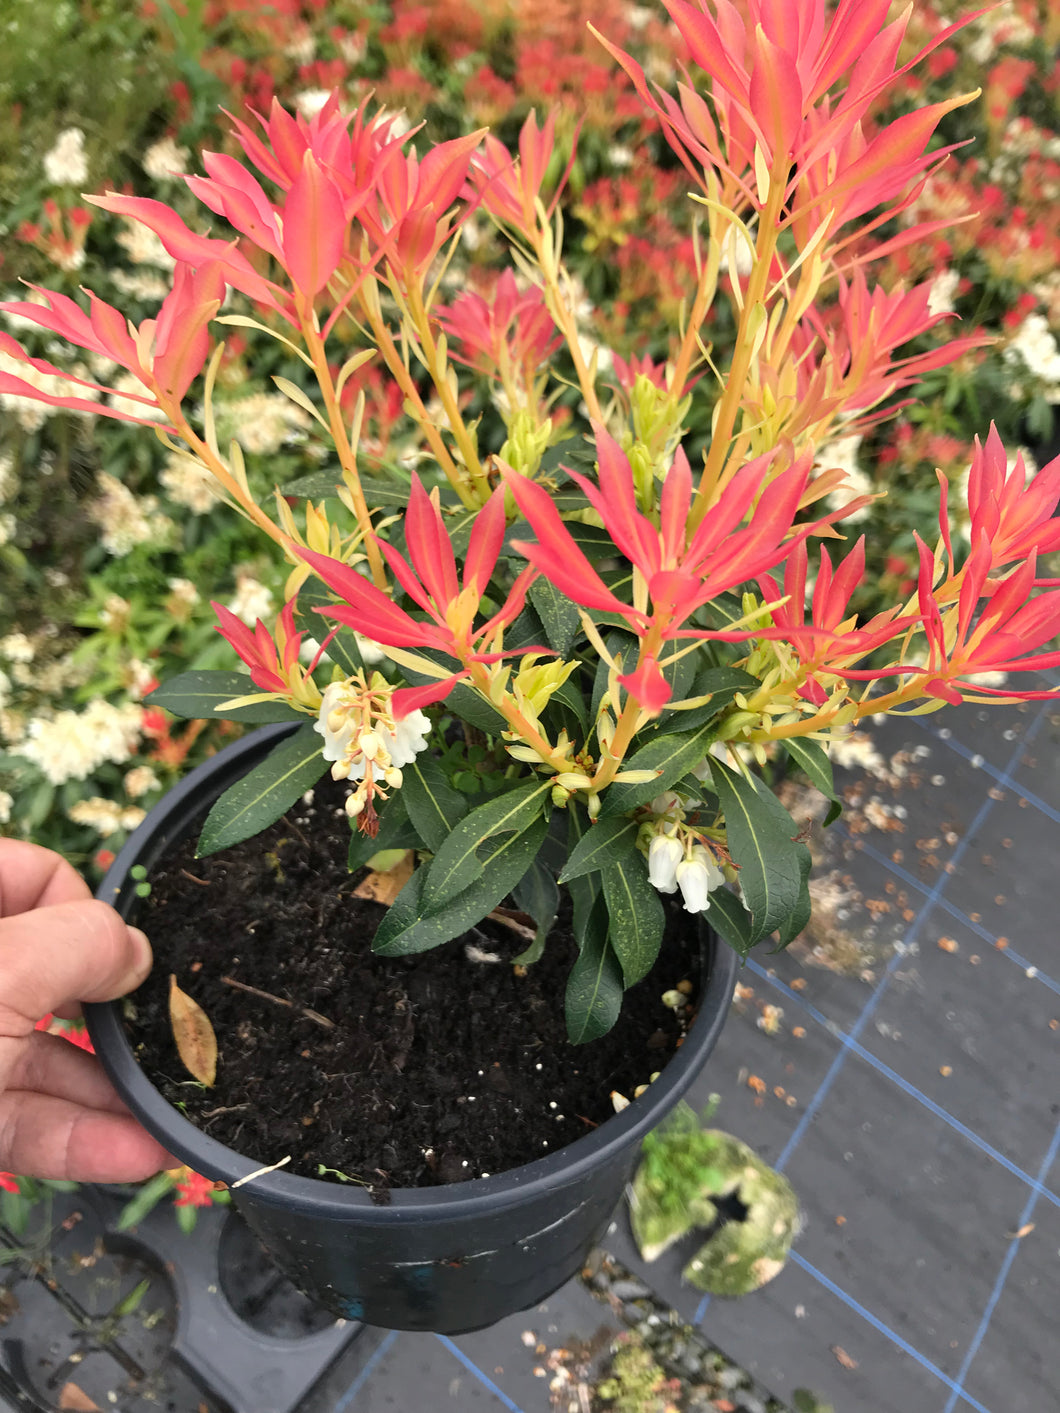 3 Pieris 'Forest Flame' Shrub in Large 2L Pots Evergreen